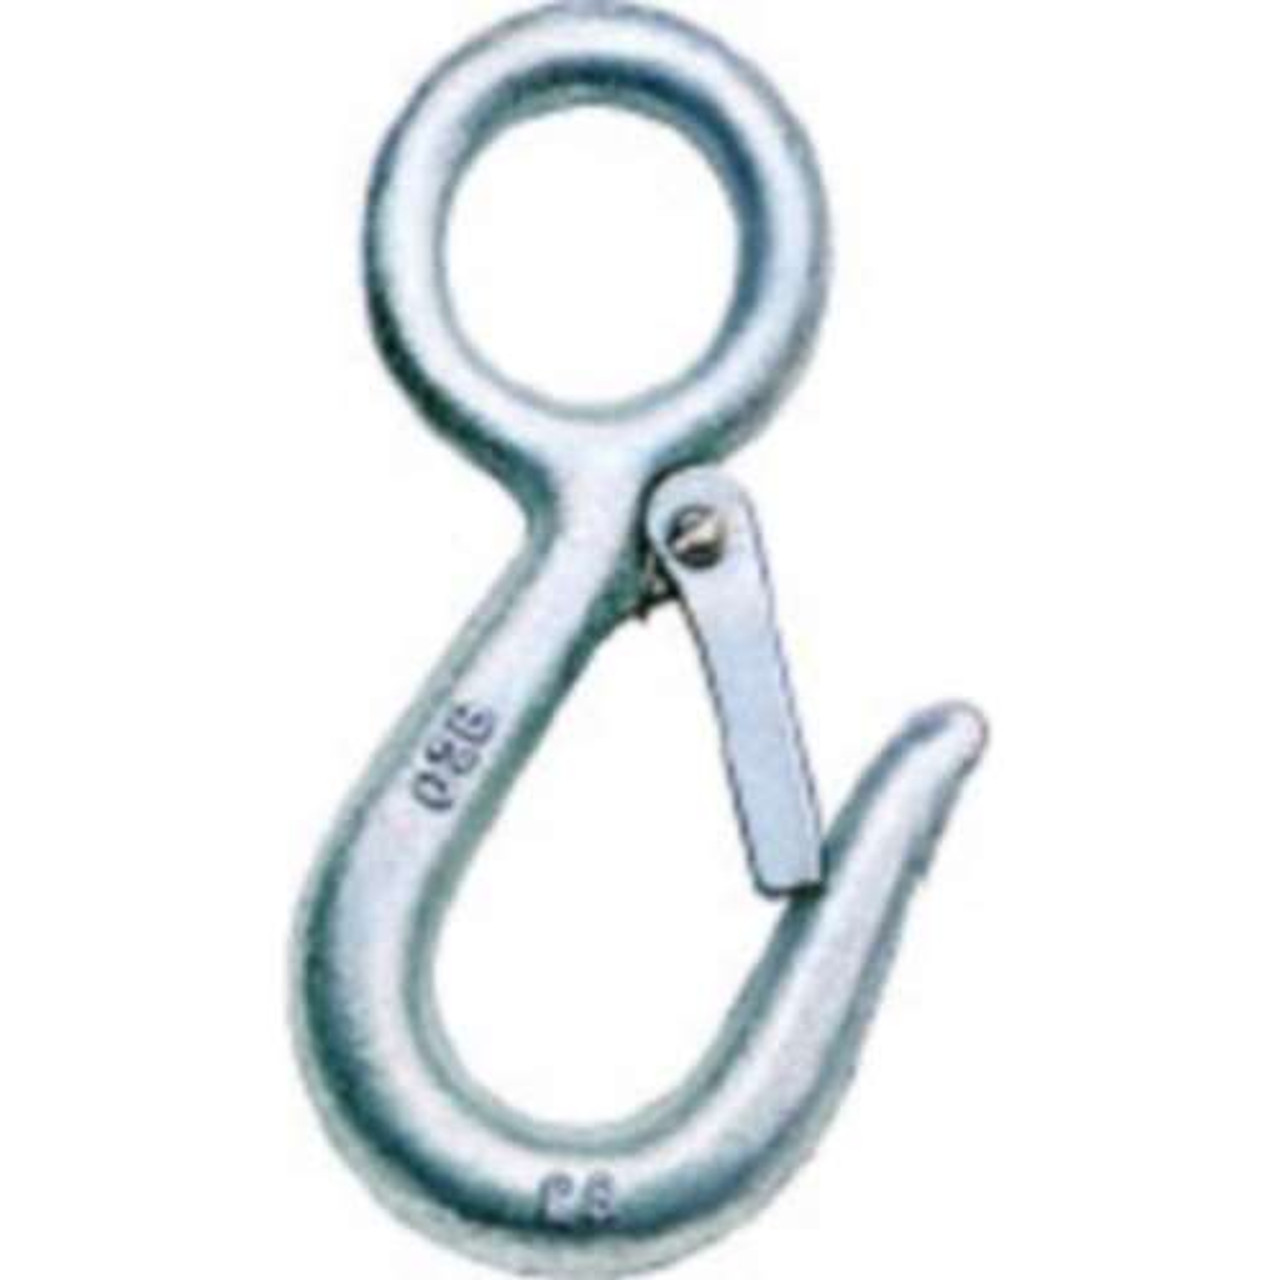 9/16 CHICAGO SAFETY SNAP HOOK W/LATCH- WLL 1000 LBS -229609 - Bairstow  Lifting Products